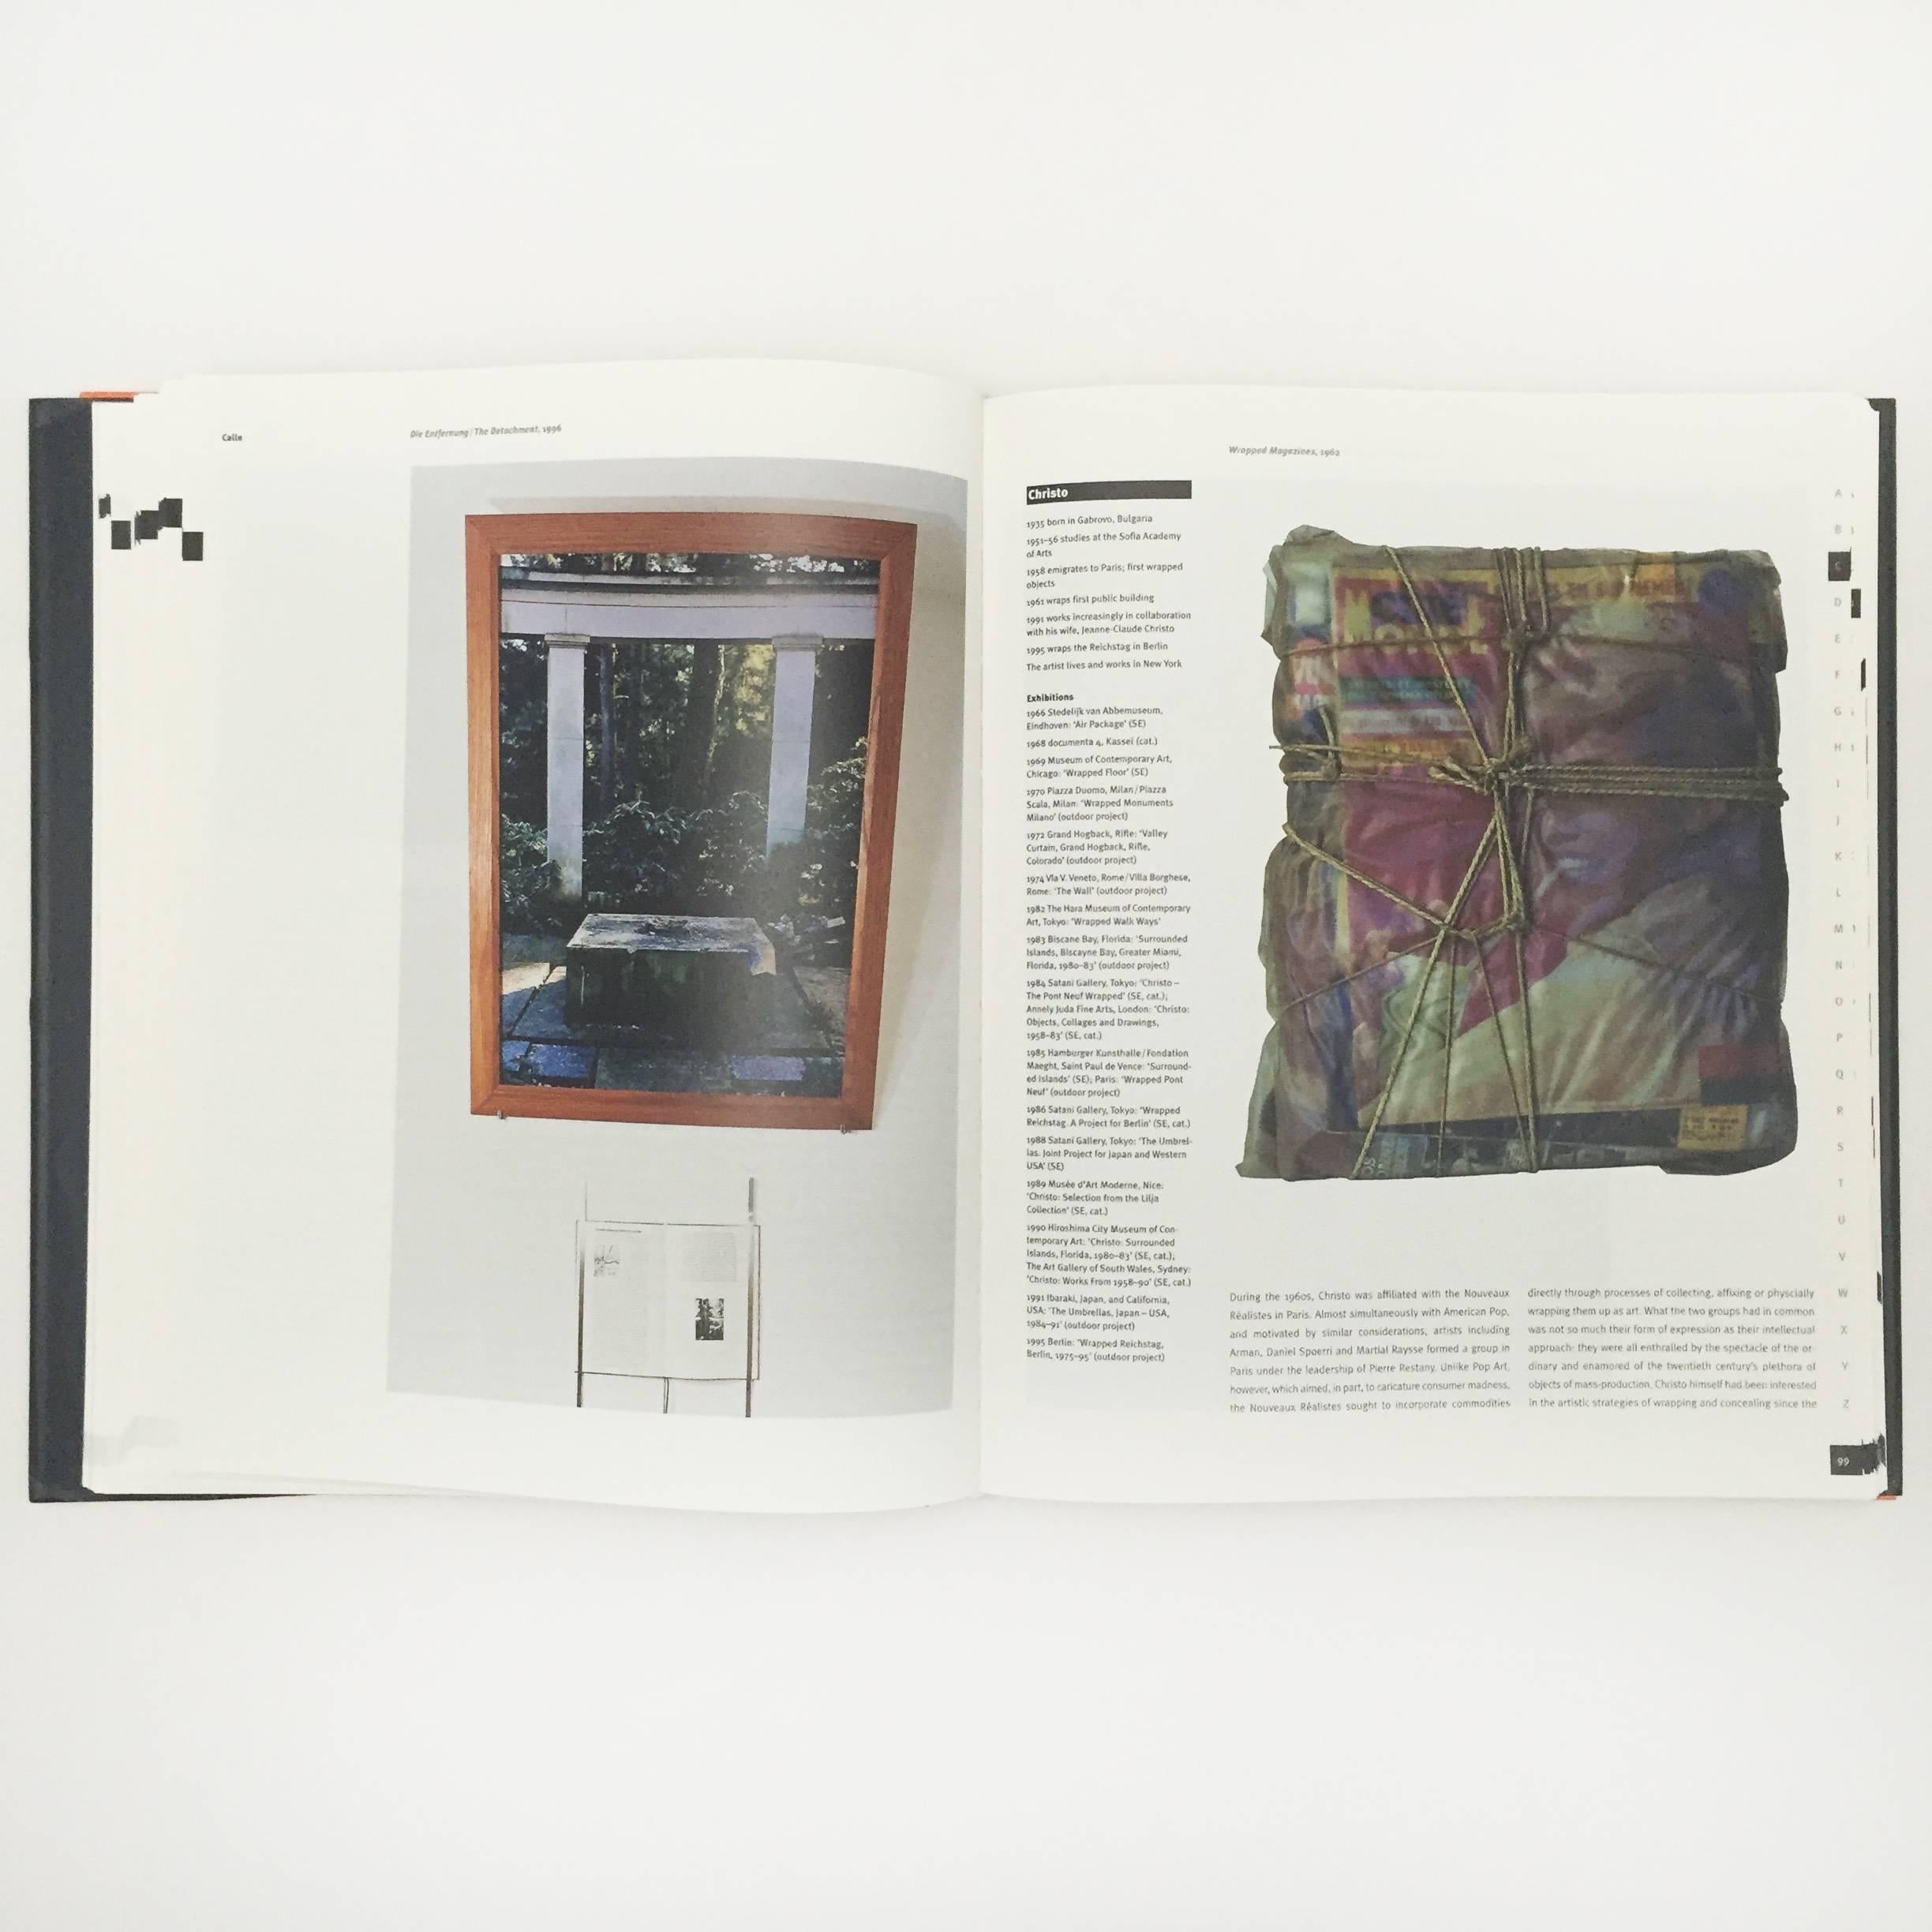 First edition, published by Prestel-Verlag & Siemens Kulturprogramm, 1998.

Ingrid Schaffer & Matthias Winzen.

This publication, published in conjunction with an exhibition of the same name held at P.S.1 Contemporary Art Centre, New York in